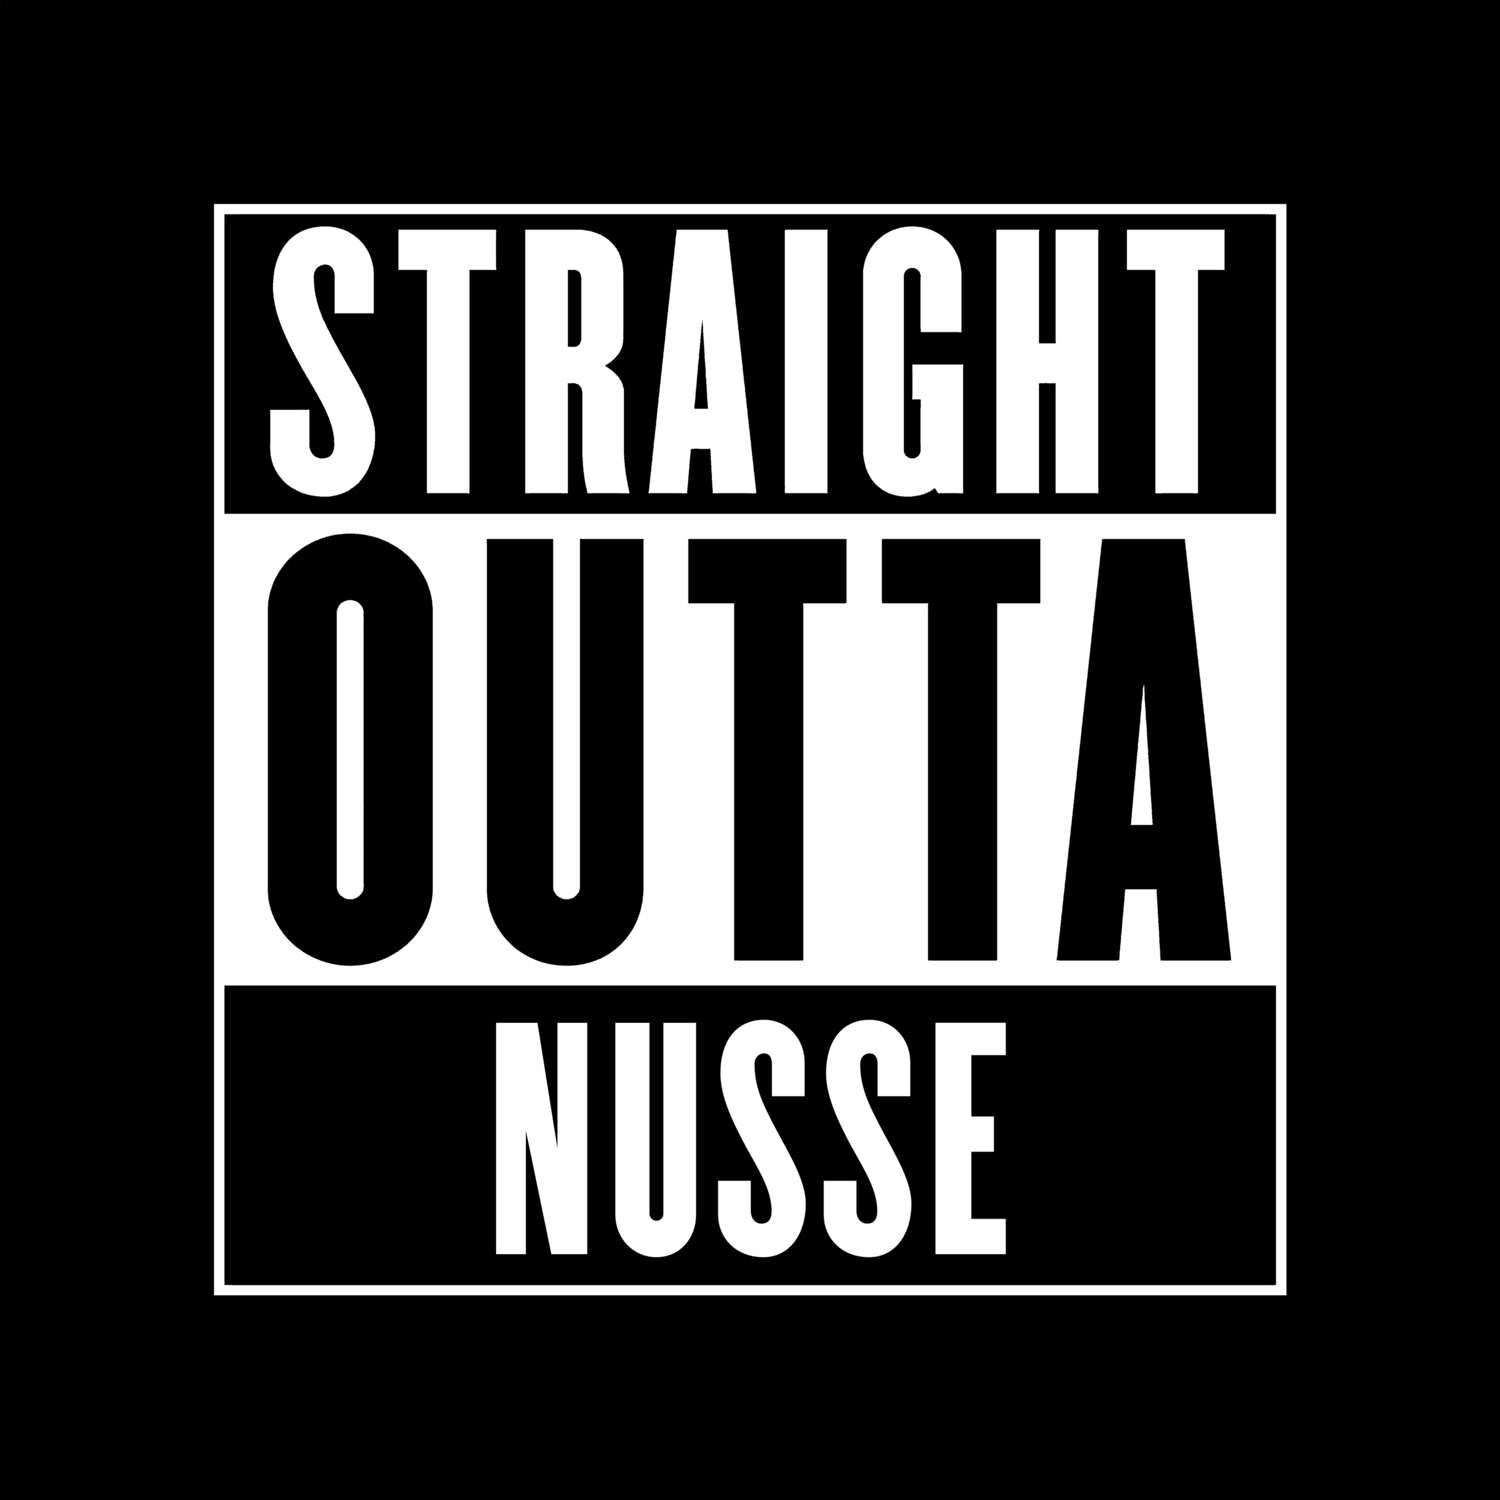 Nusse T-Shirt »Straight Outta«